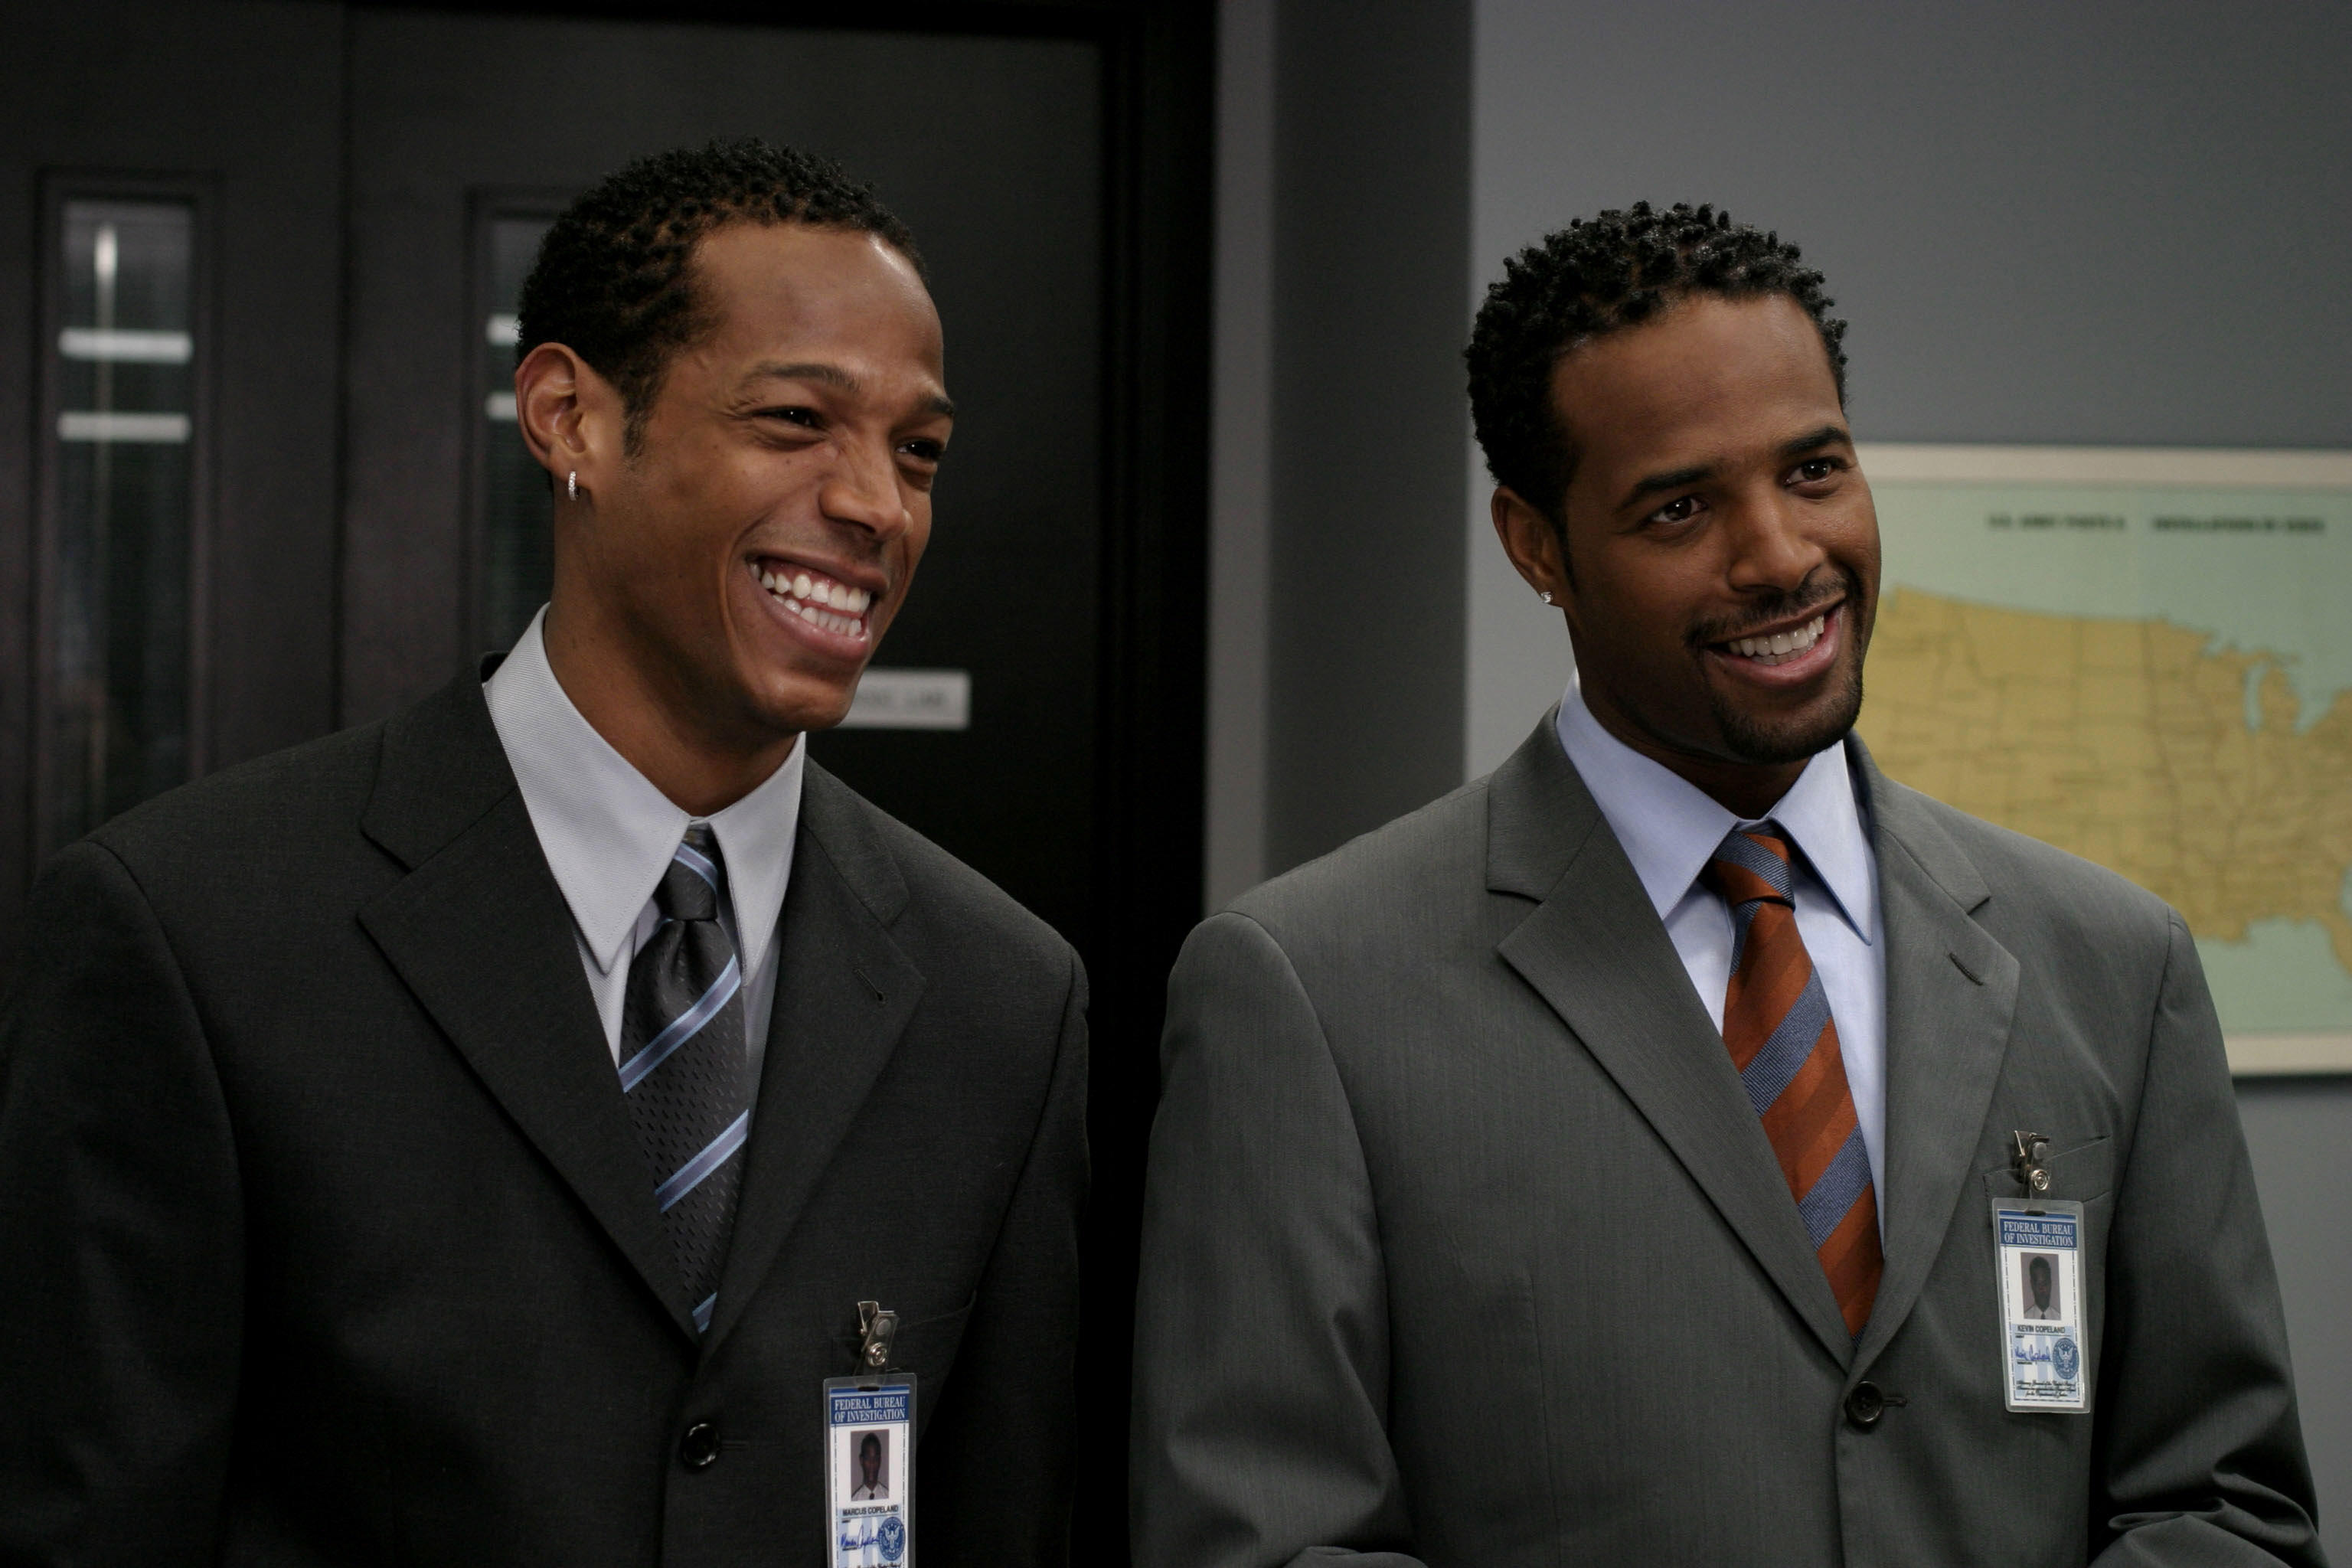 Marlon Wayans rips into cancel culture and says movies like White Chicks  are needed in society